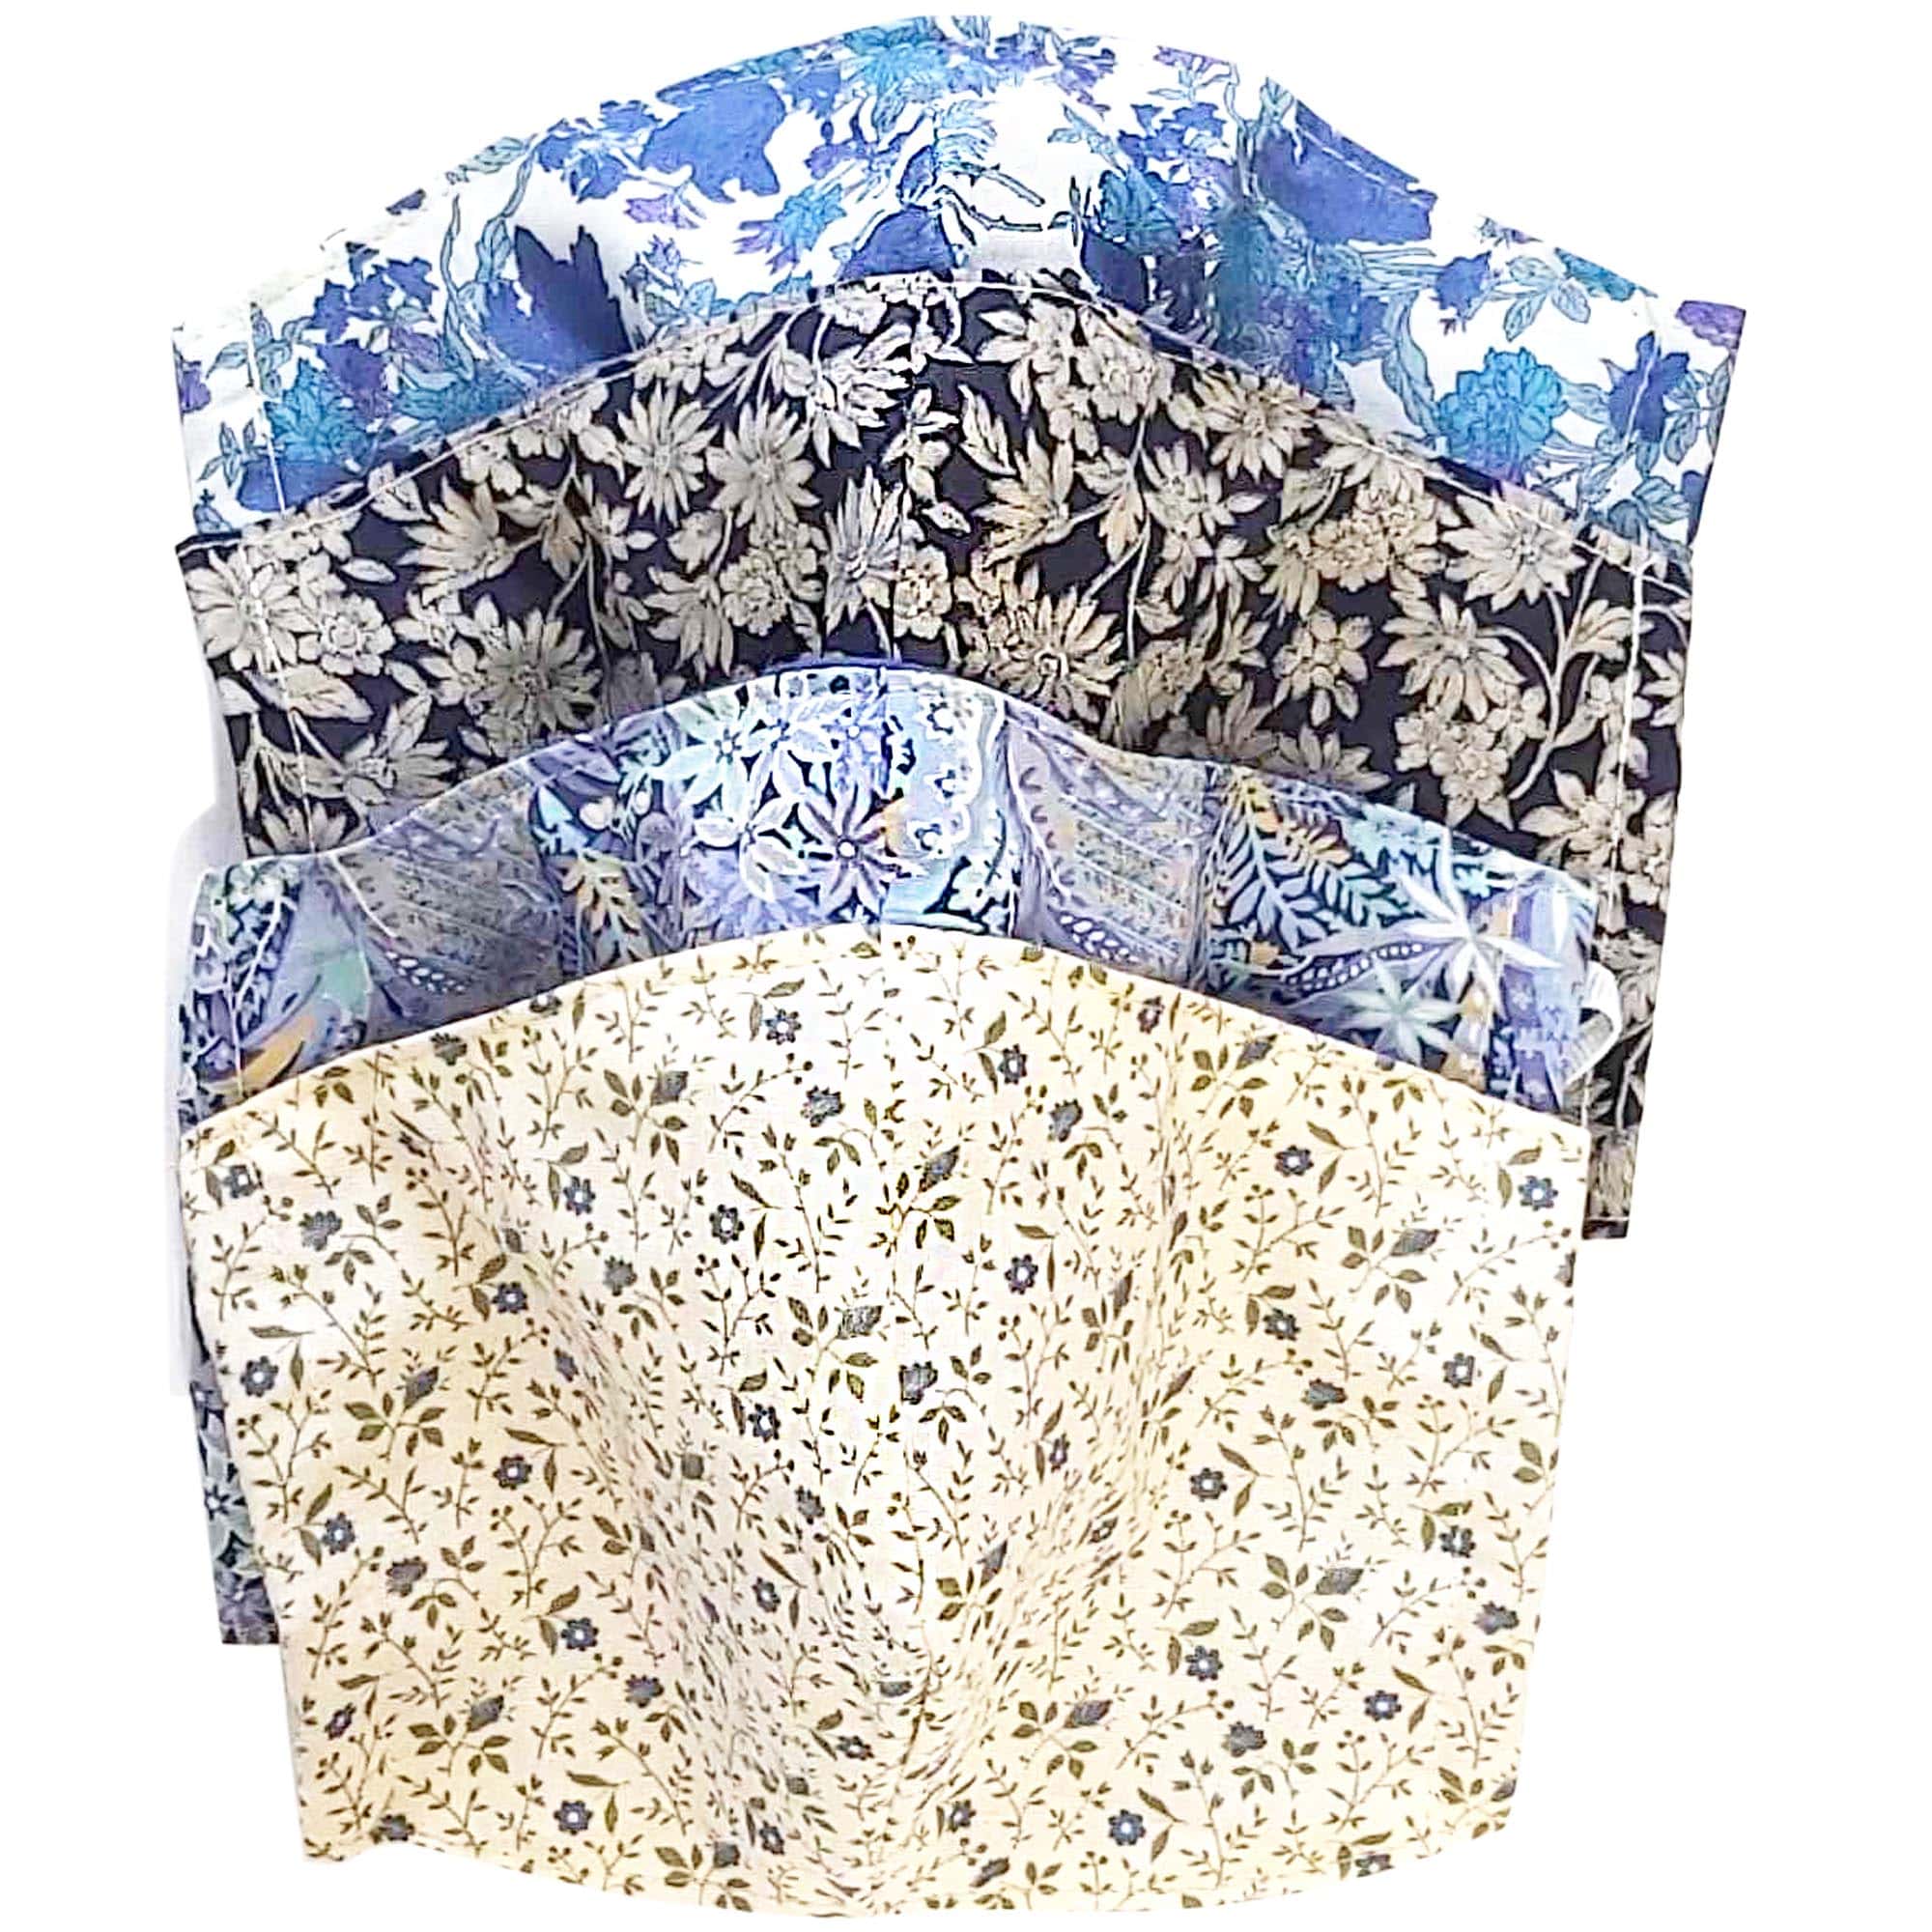 Fine-Cell-Work-Upcycled-Face-Coverings-Assorted-Blue-Prints.jpg